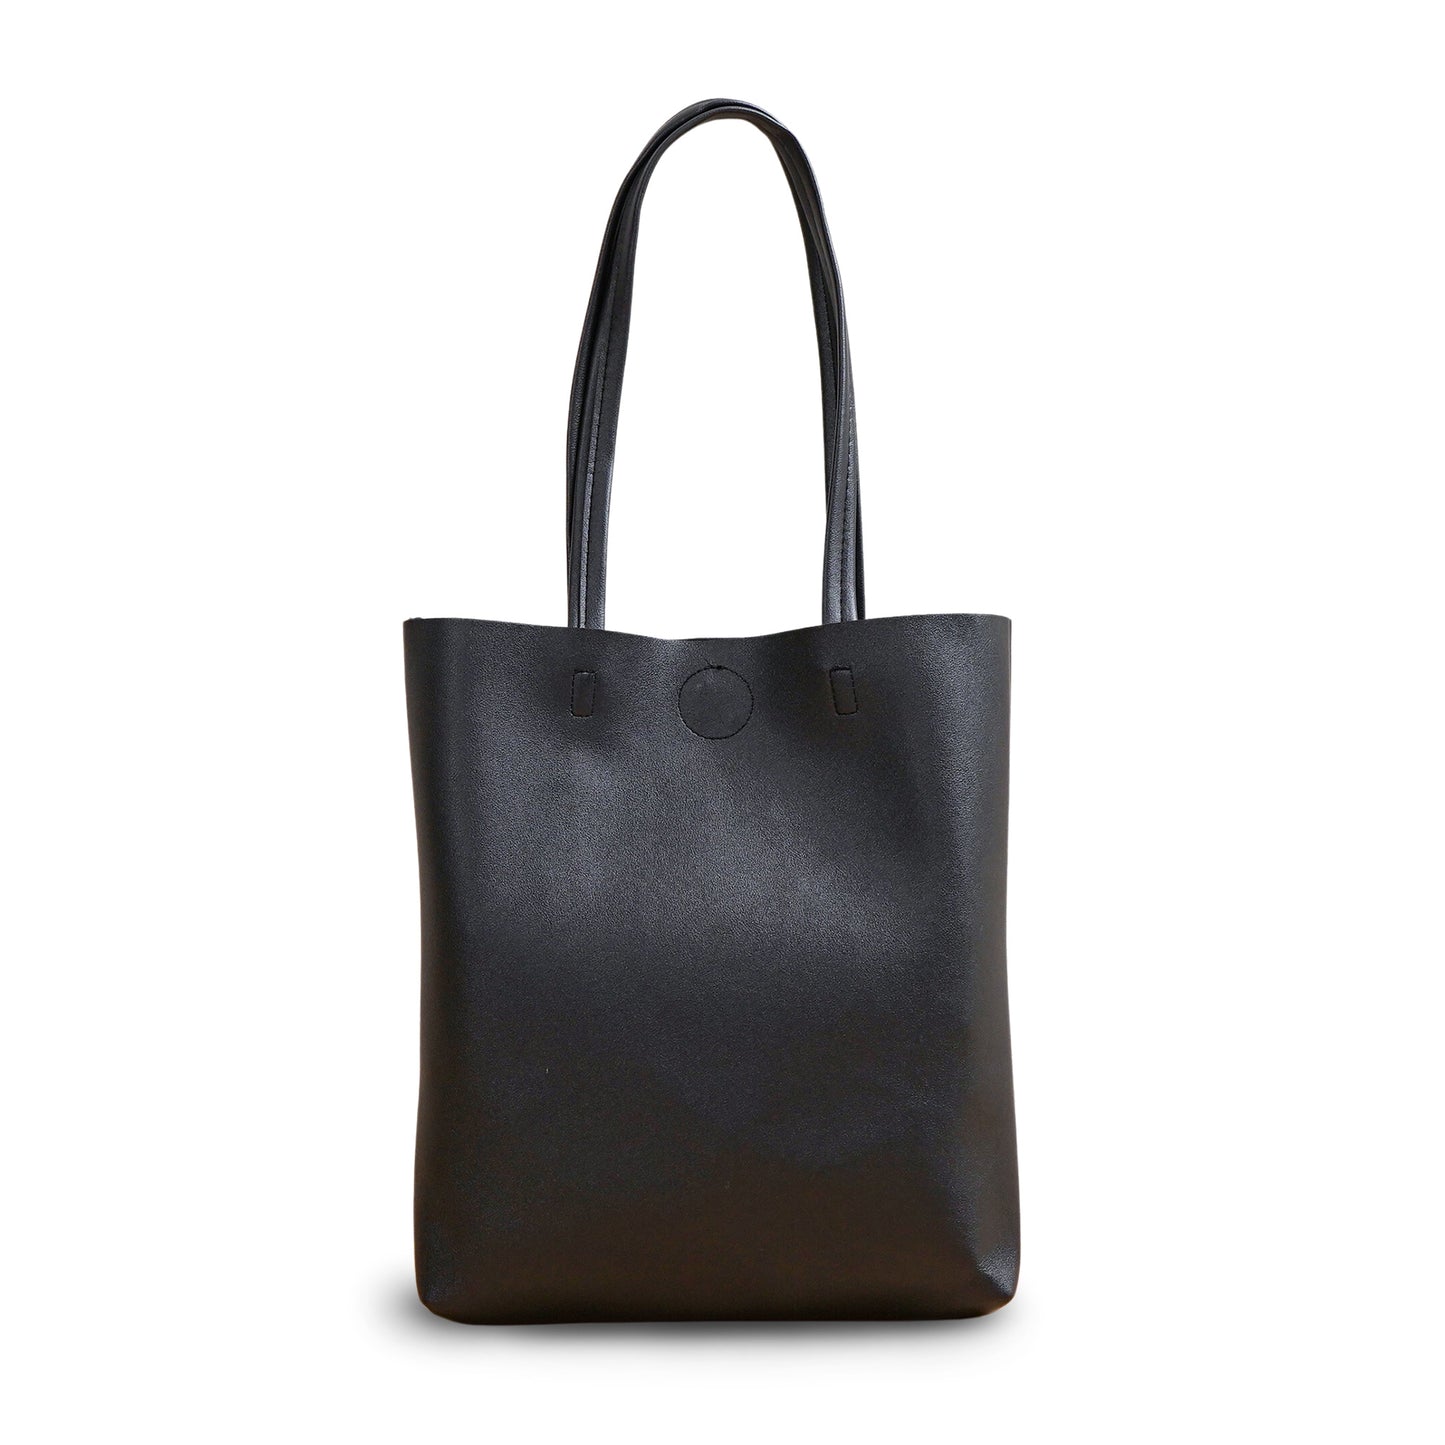 Eco leather vertical tote bag